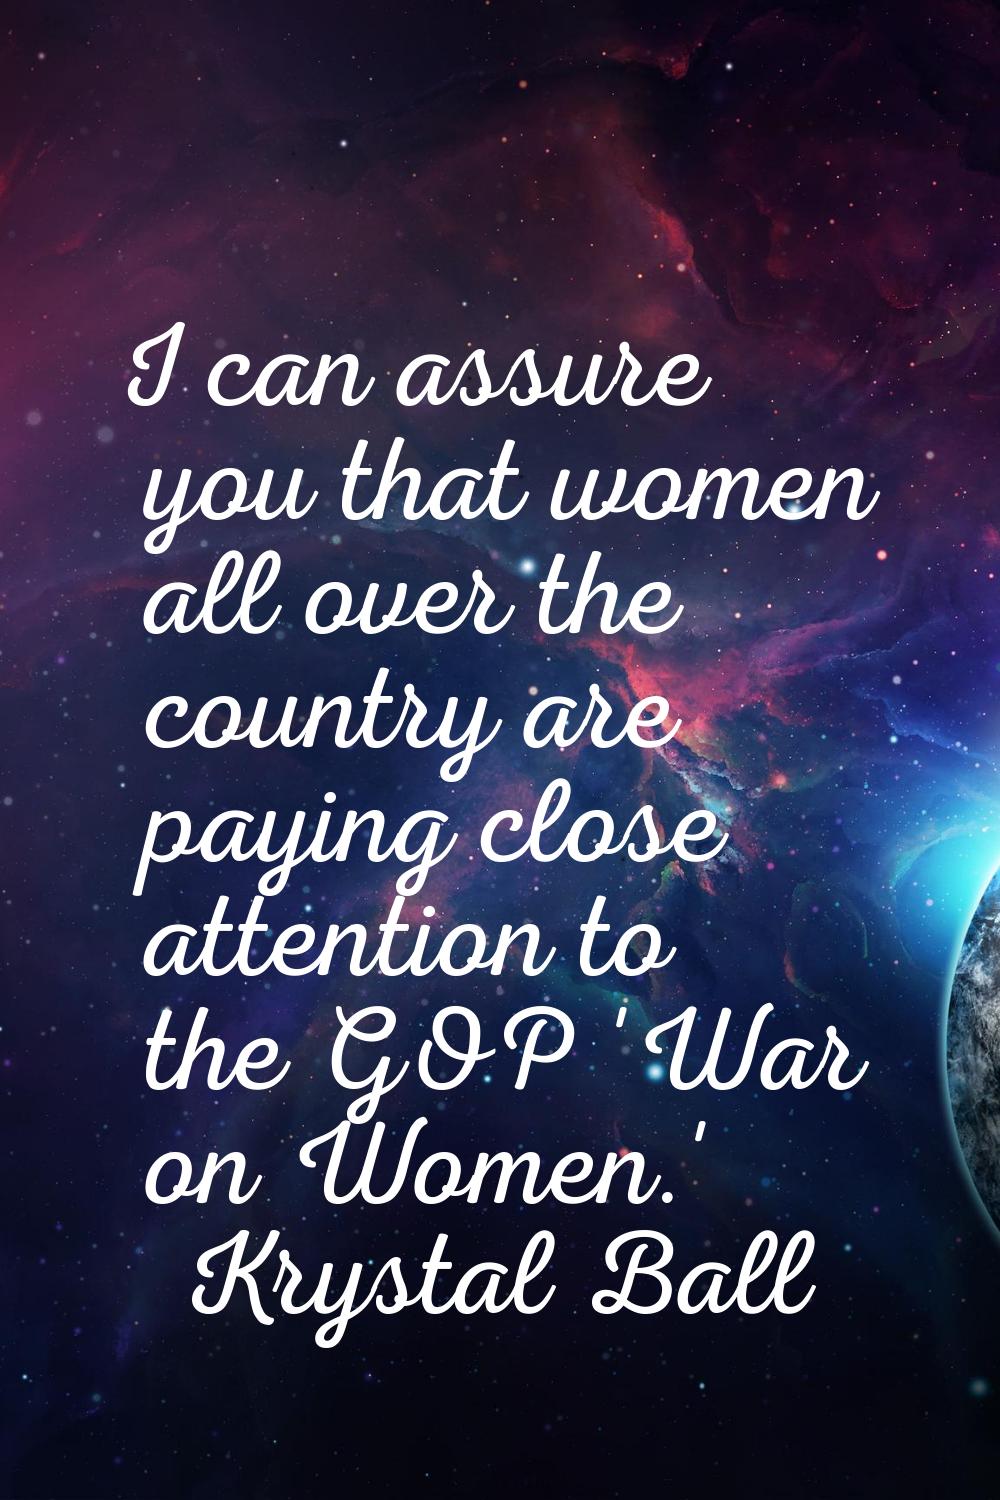 I can assure you that women all over the country are paying close attention to the GOP 'War on Wome